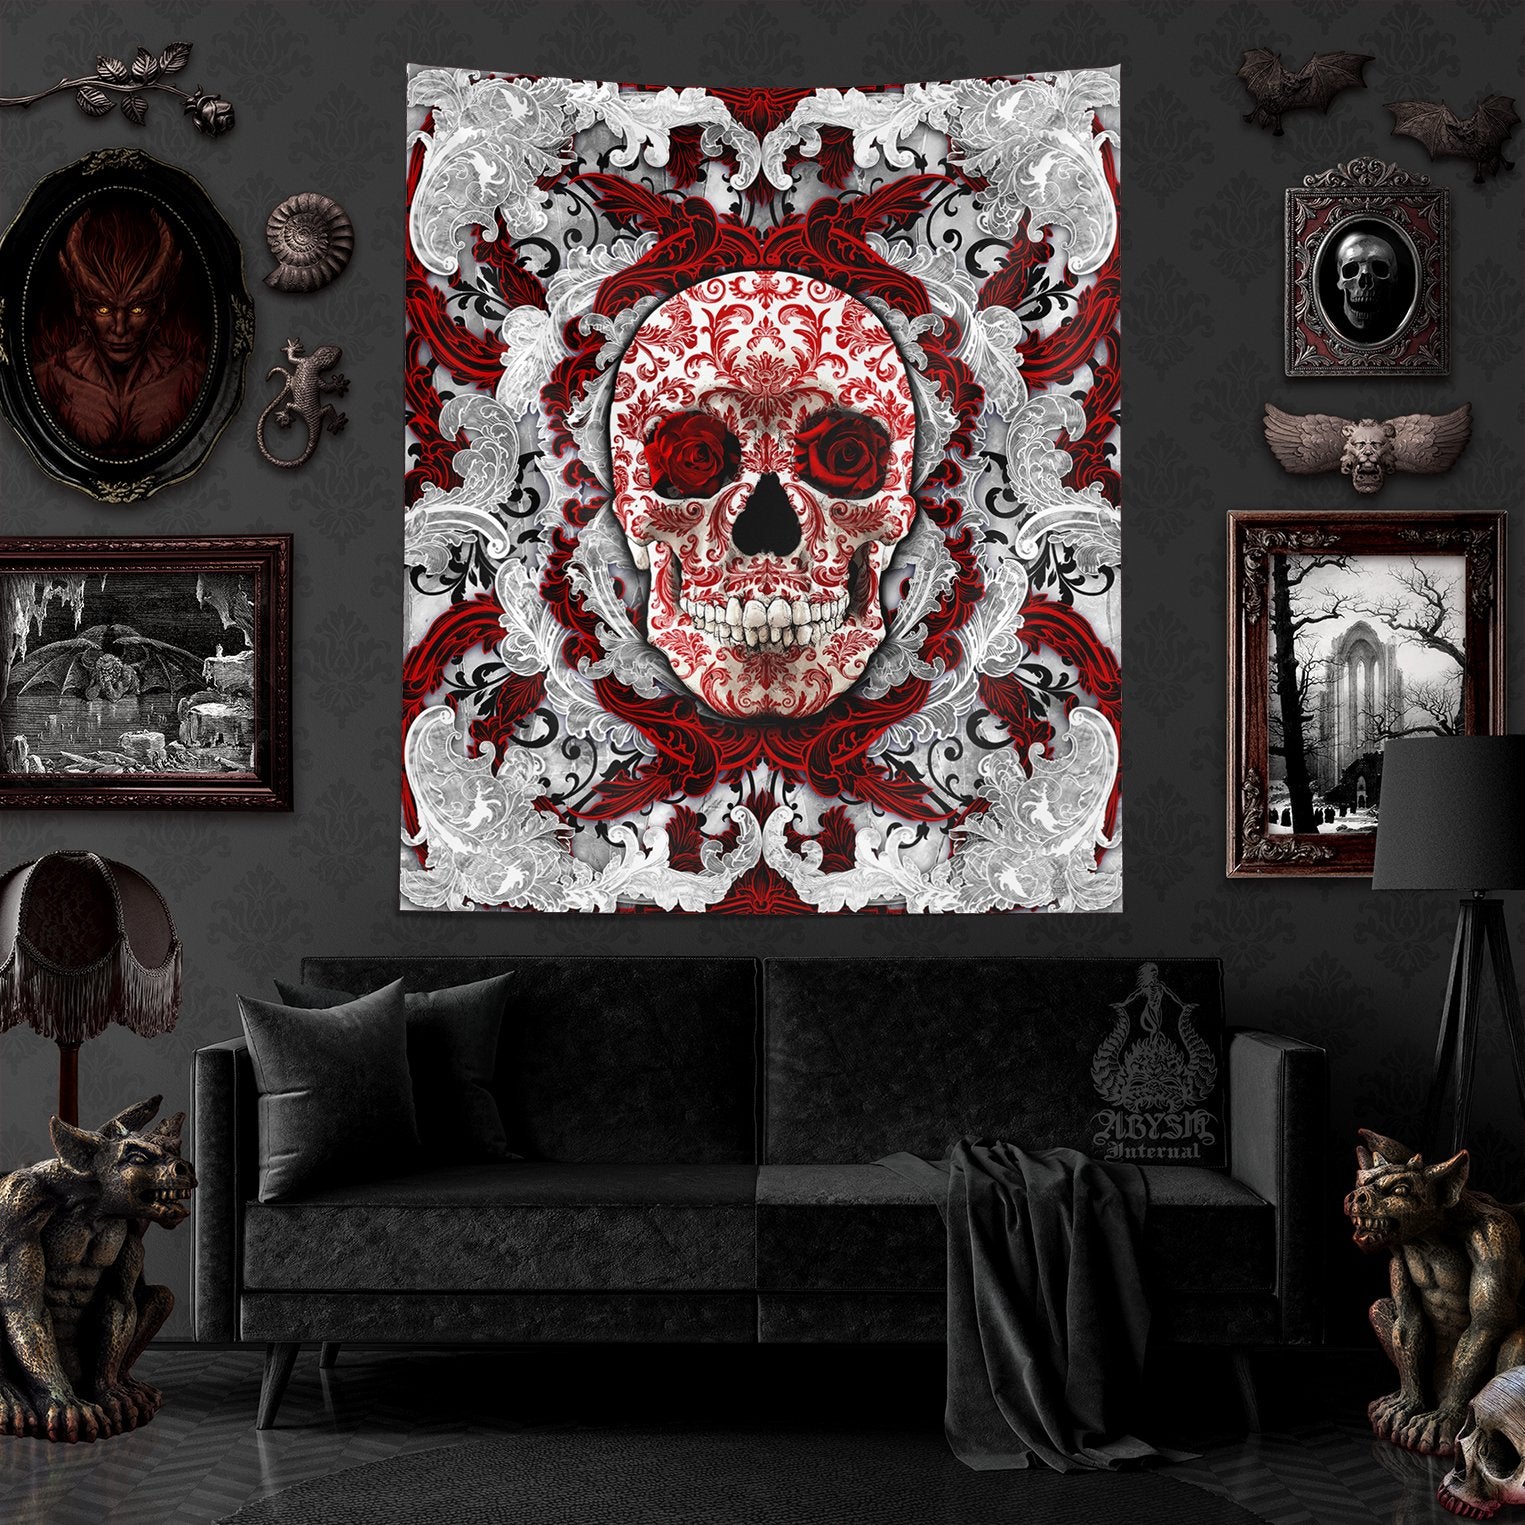 Skull Tapestry, Gothic Wall Hanging, Macabre Home Decor, Vertical Art Print - White Goth, Bloody & Red Roses - Abysm Internal